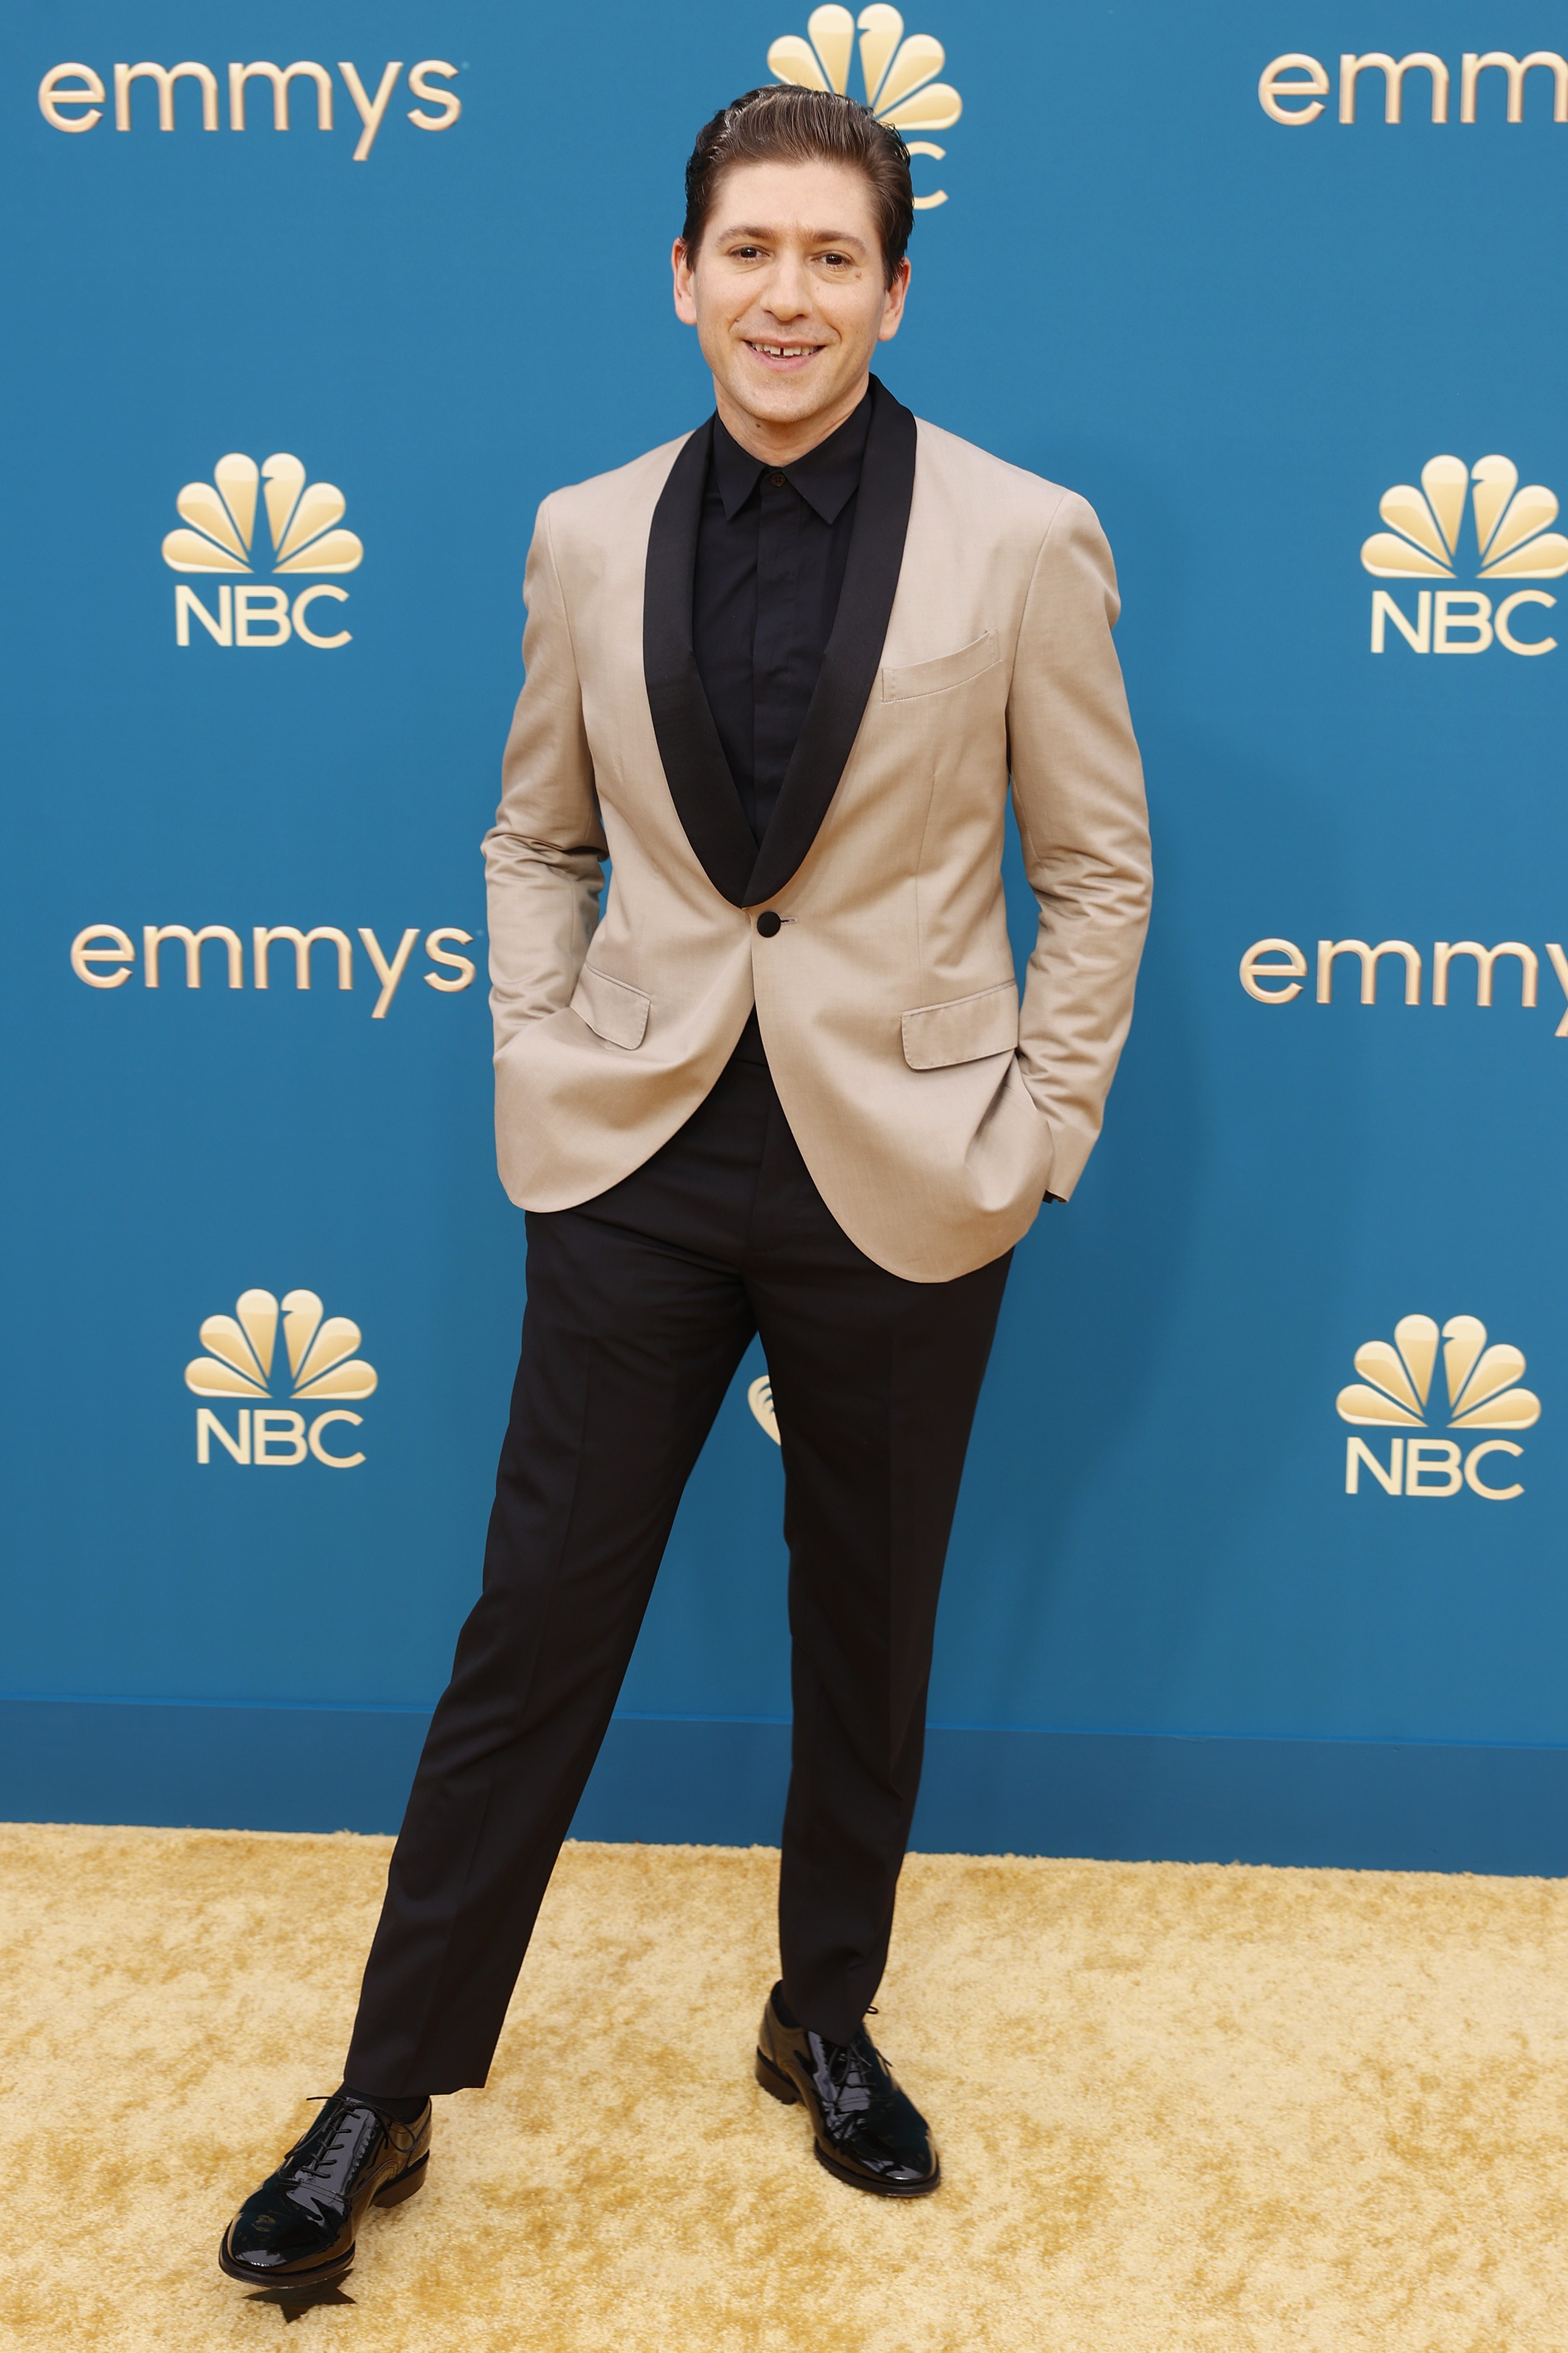 LOS ANGELES, CALIFORNIA - SEPTEMBER 12: 74th ANNUAL PRIMETIME EMMY AWARDS -- Pictured: Michael Zegen arrives to the 74th Annual Primetime Emmy Awards held at the Microsoft Theater on September 12, 2022. -- (Photo by Trae Patton/NBC via Getty Images) (Foto: NBC via Getty Images)